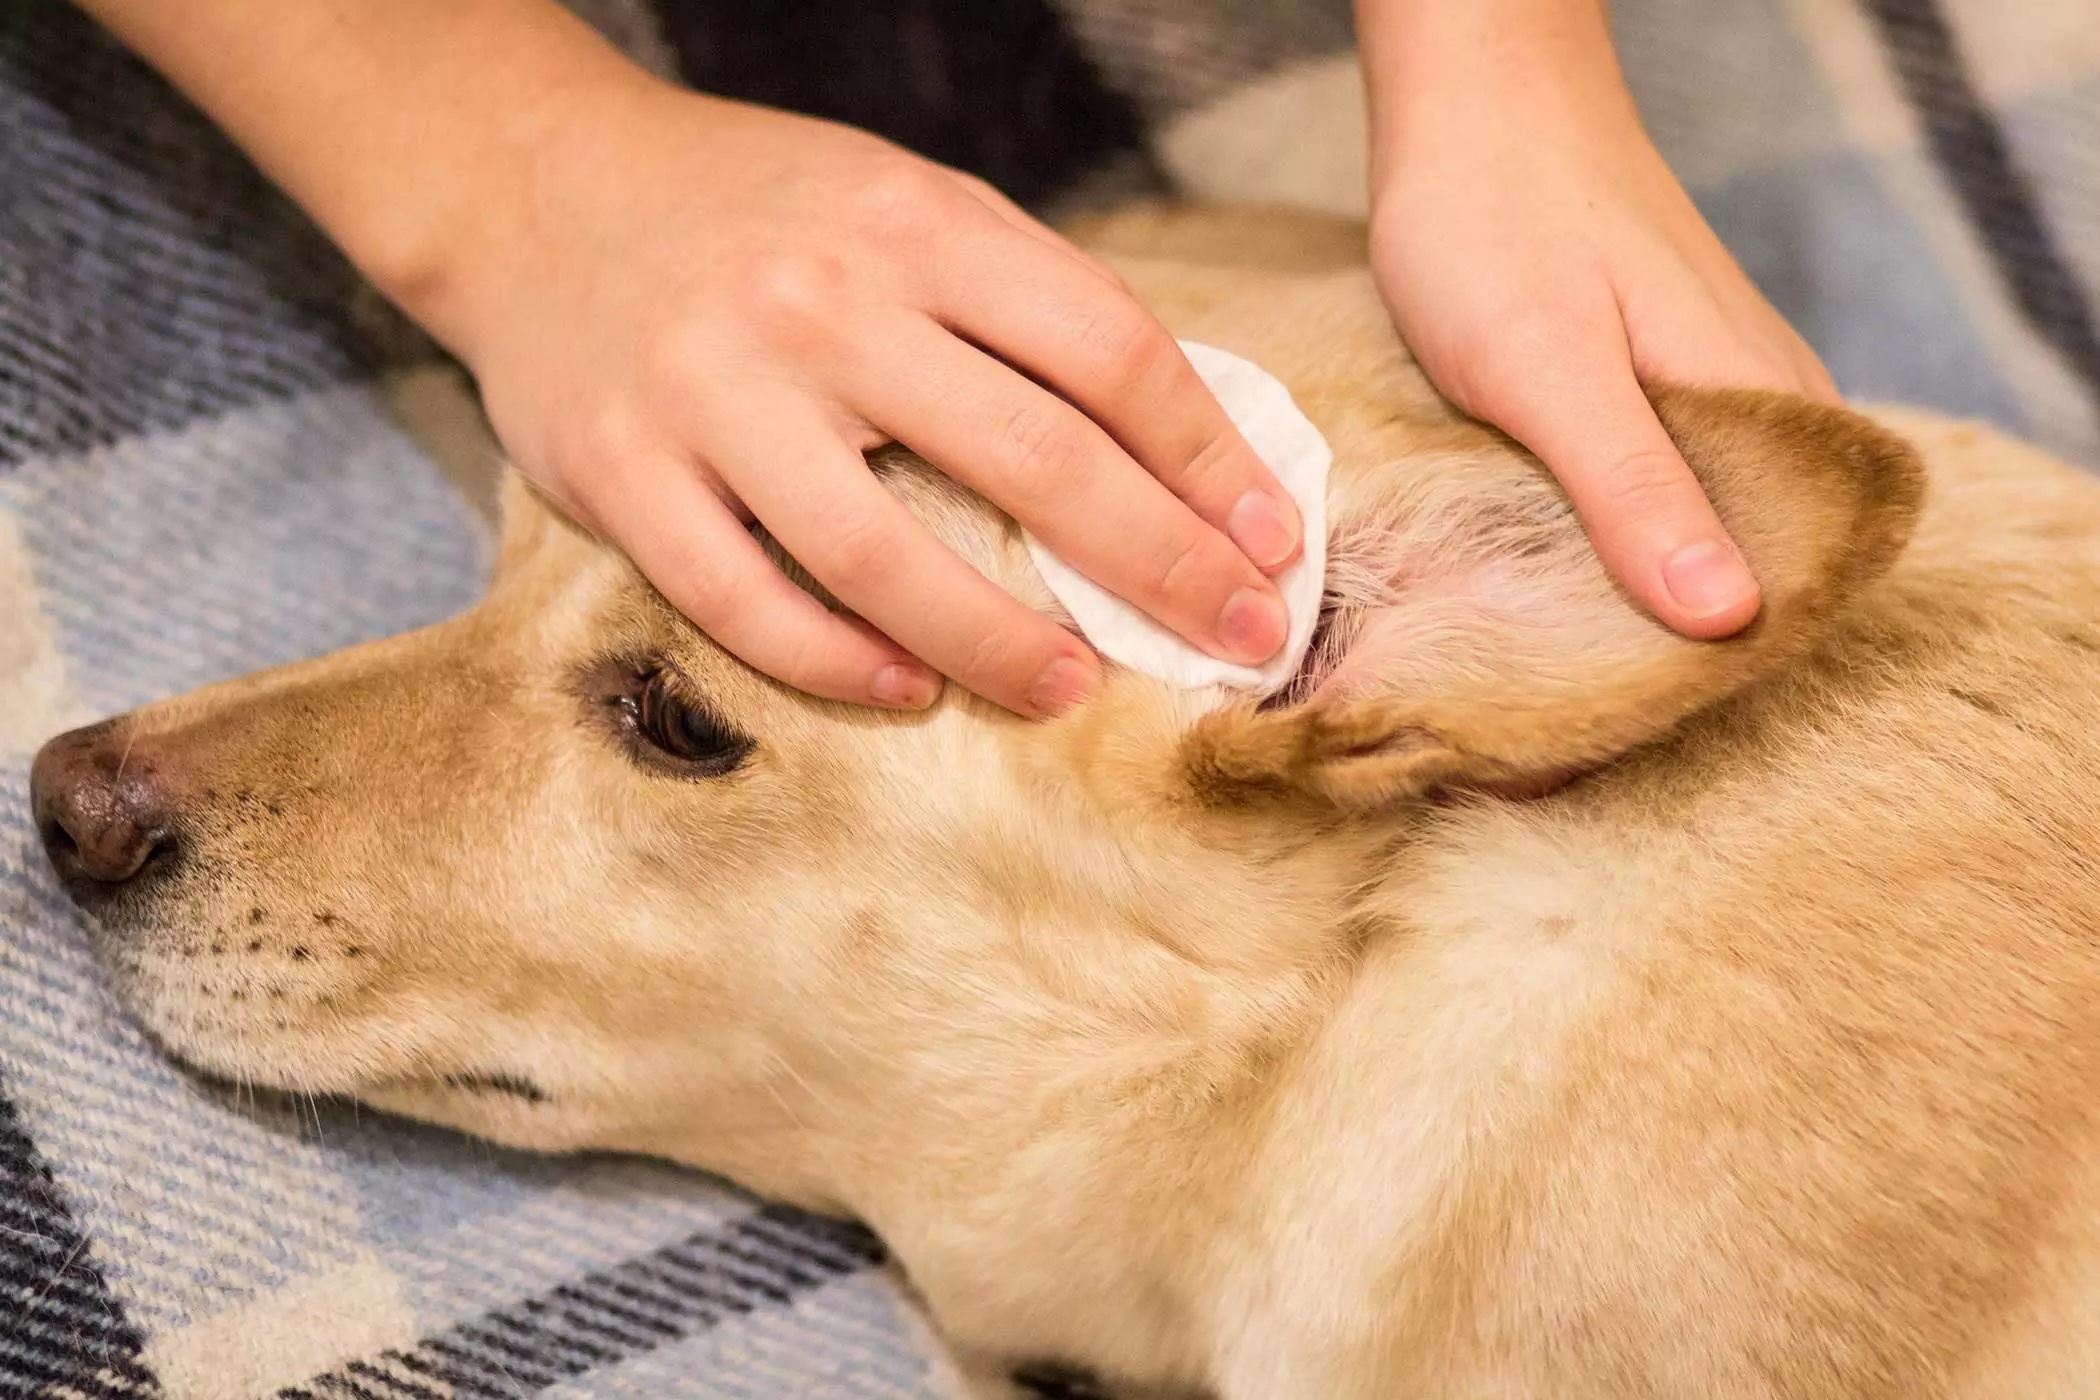 How to clean your dog's ears? So how do you properly clean your dog's ear canal?